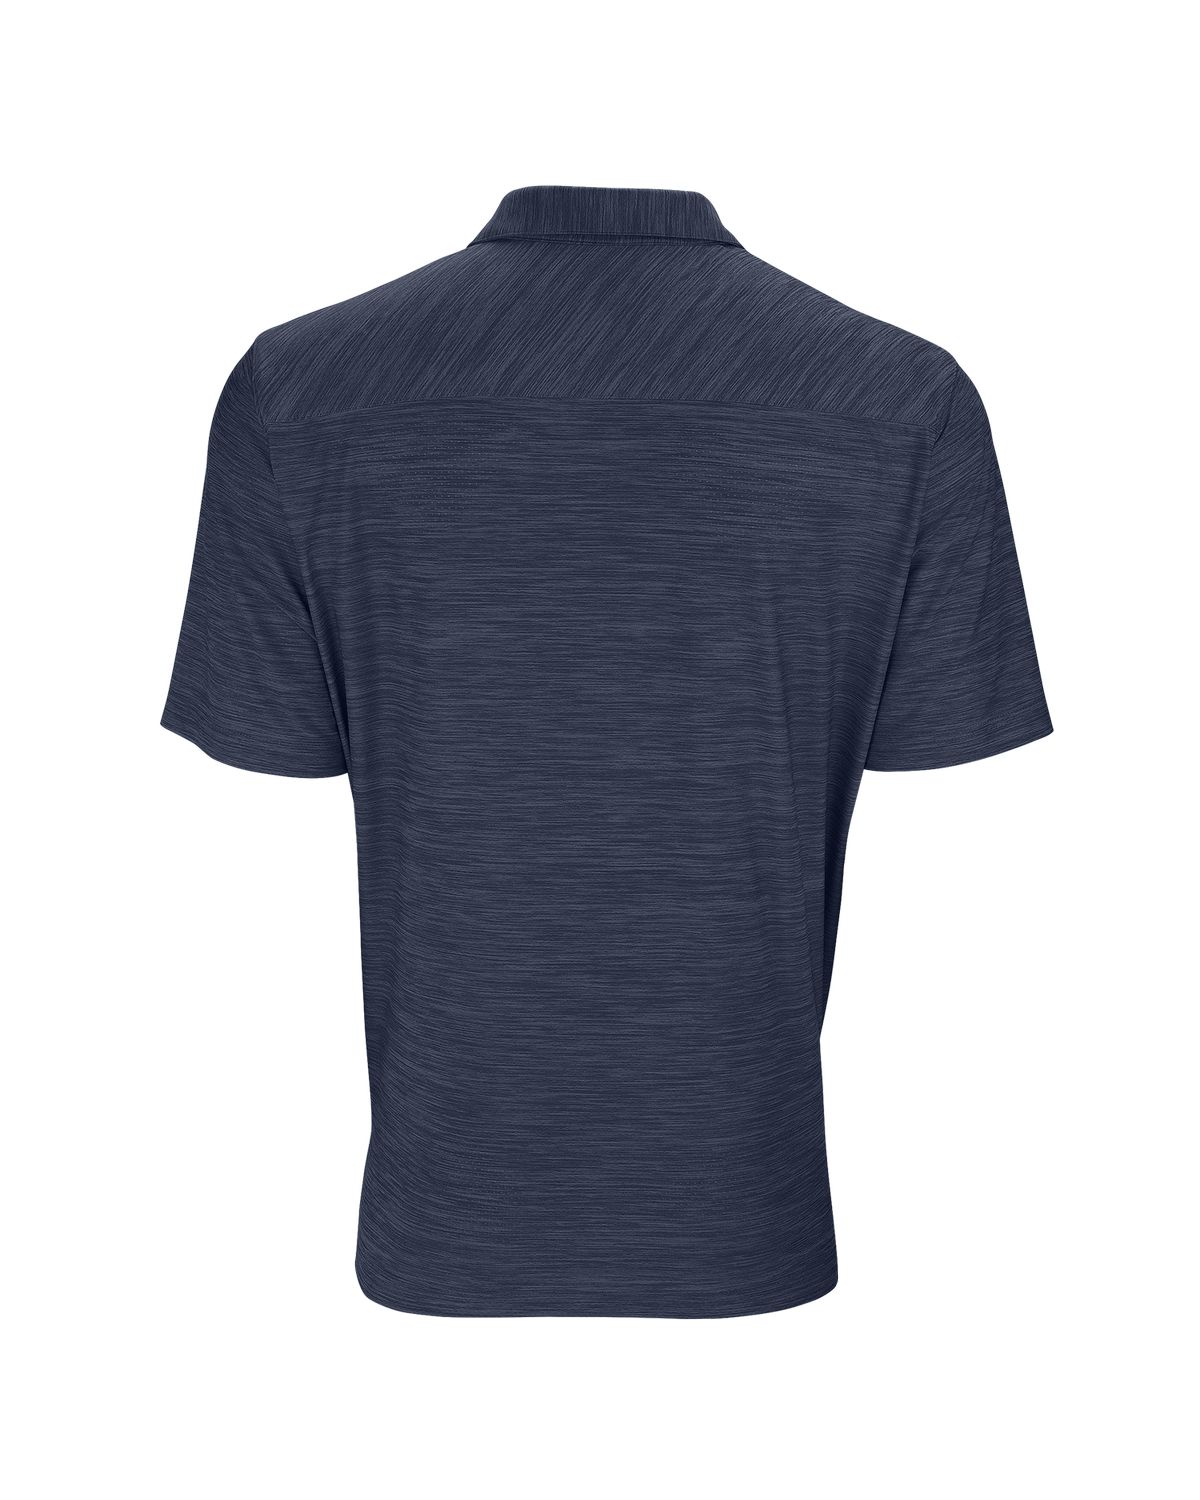 'Greg Norman GNS9K477 Play Dry Heather Solid Polo'